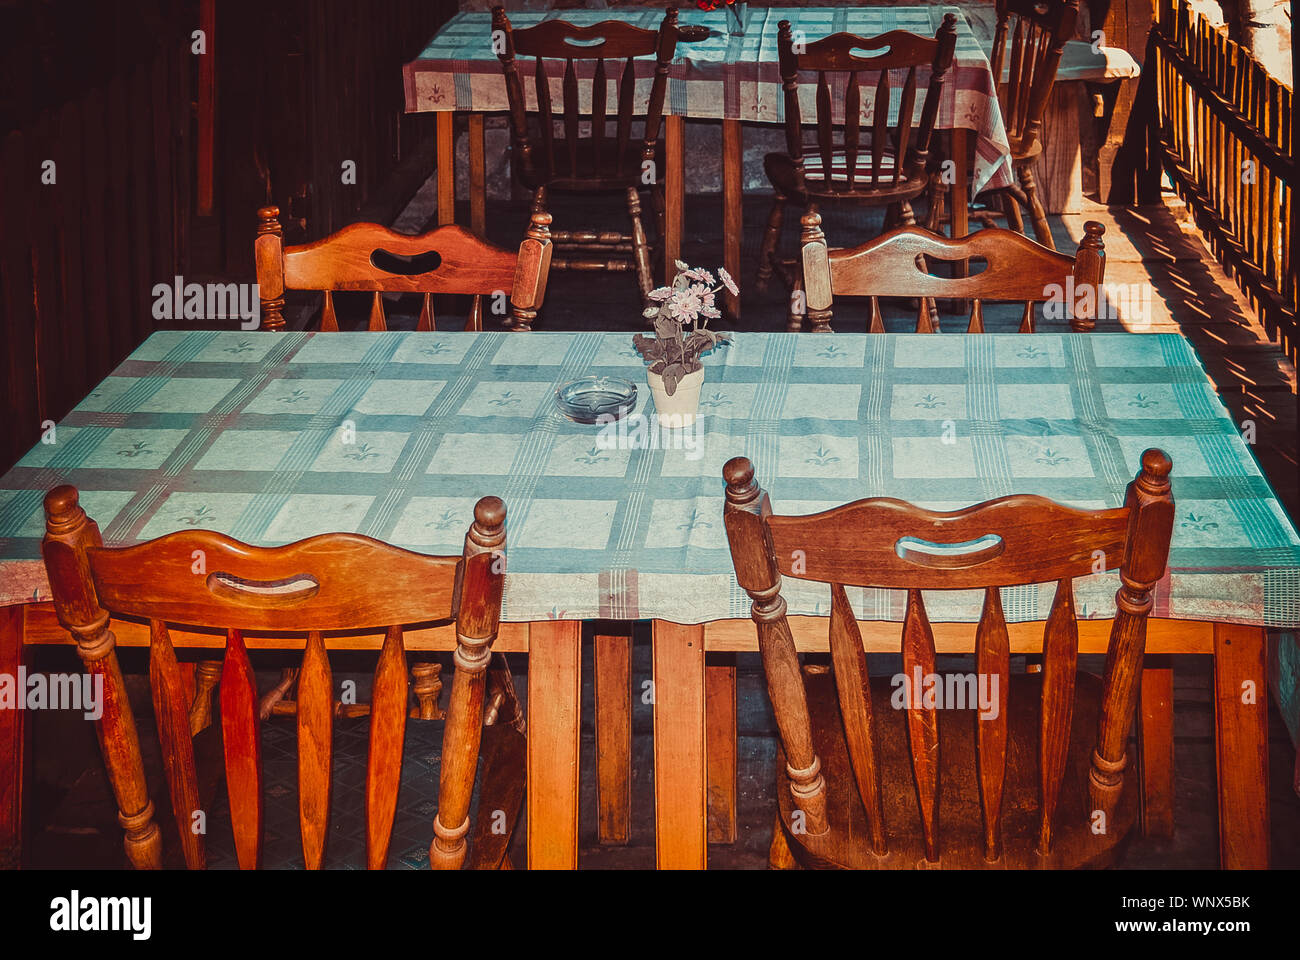 Chairs And Tables At Outdoor Restaurant Stock Photo